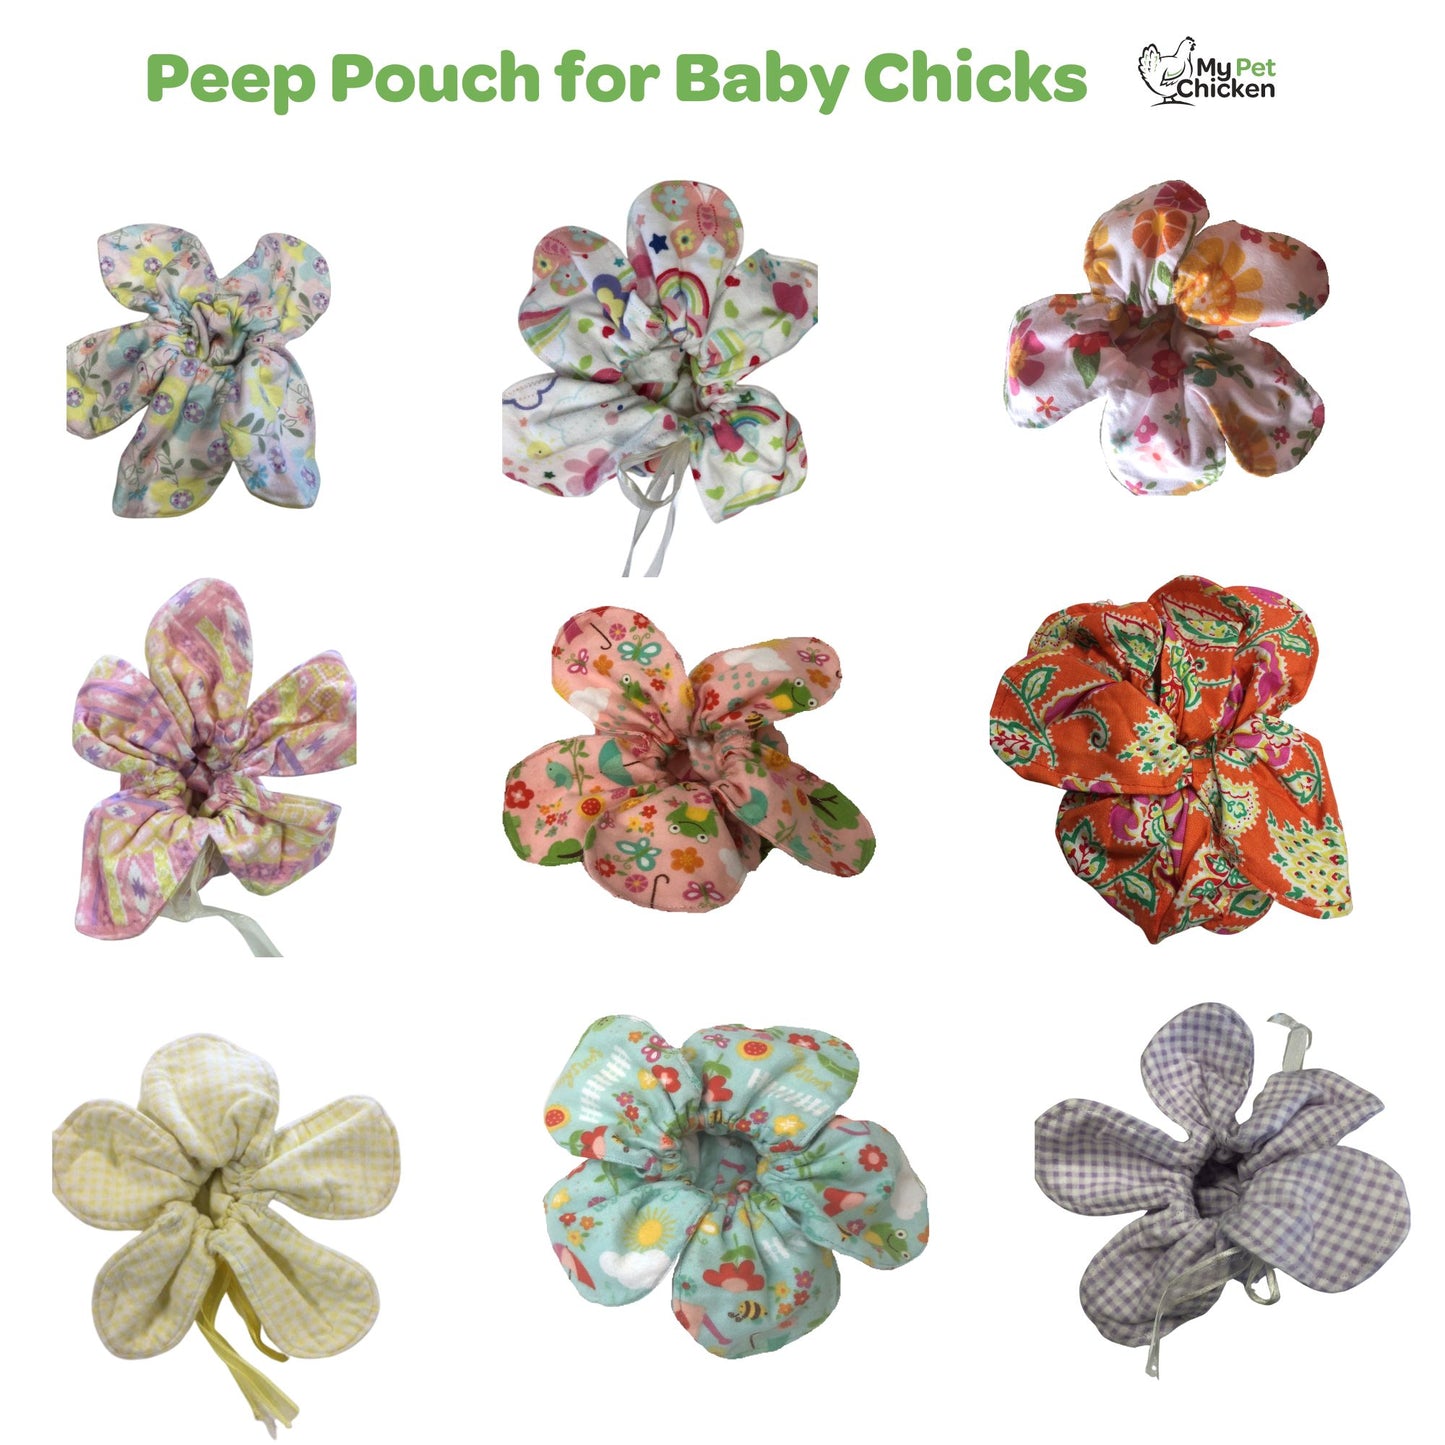 Peep Pouch - Cuddle Chicks Safely!